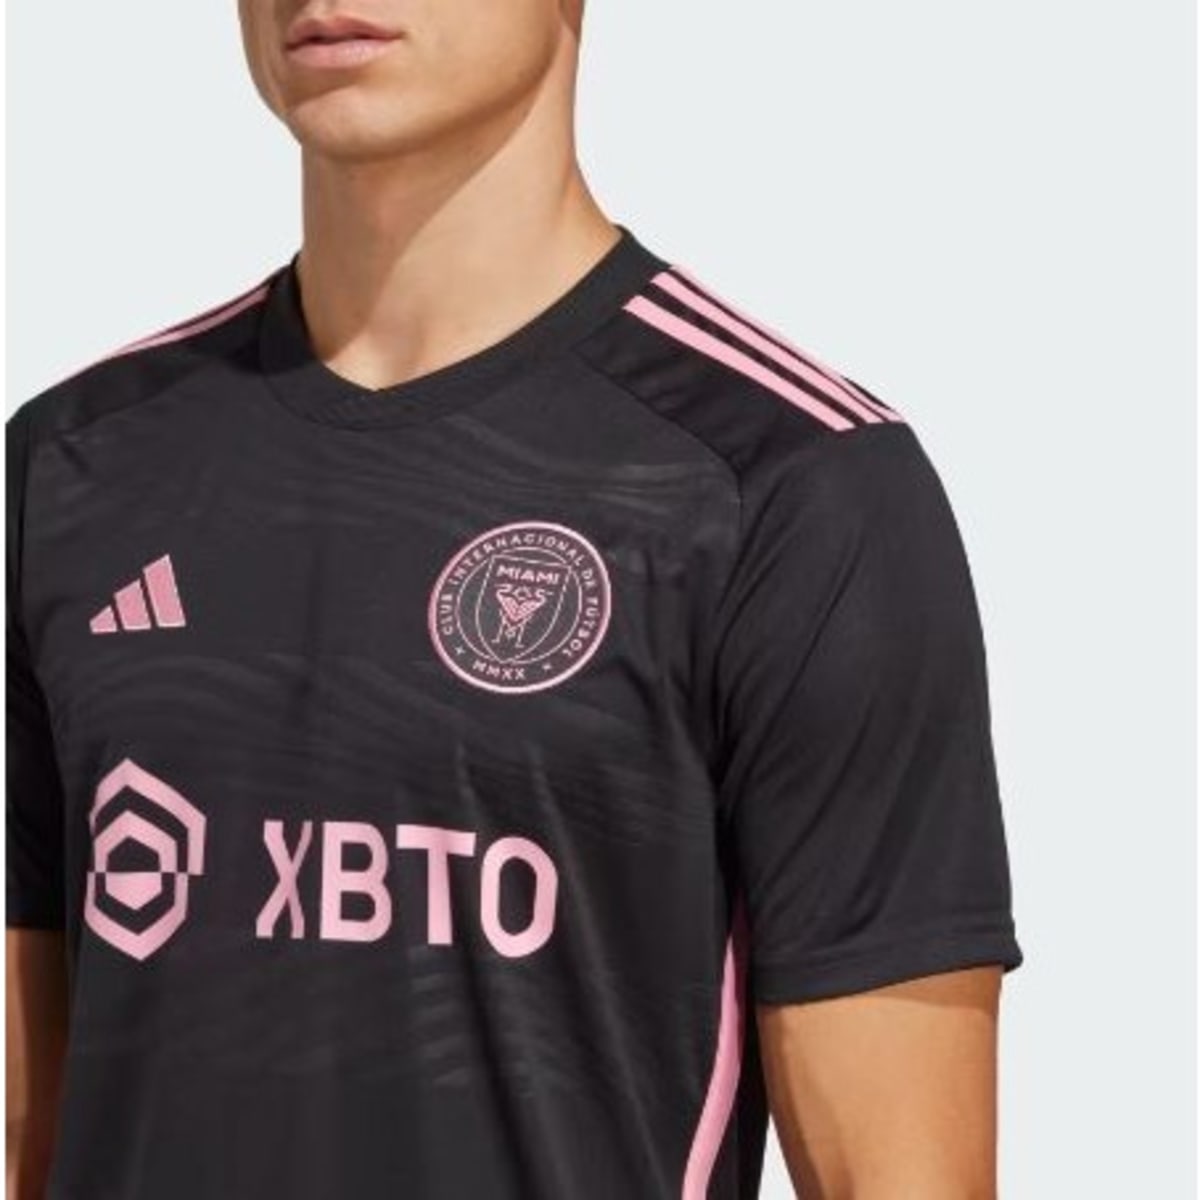 Inter Miami 2023 kit: Home, away and third jerseys, release dates